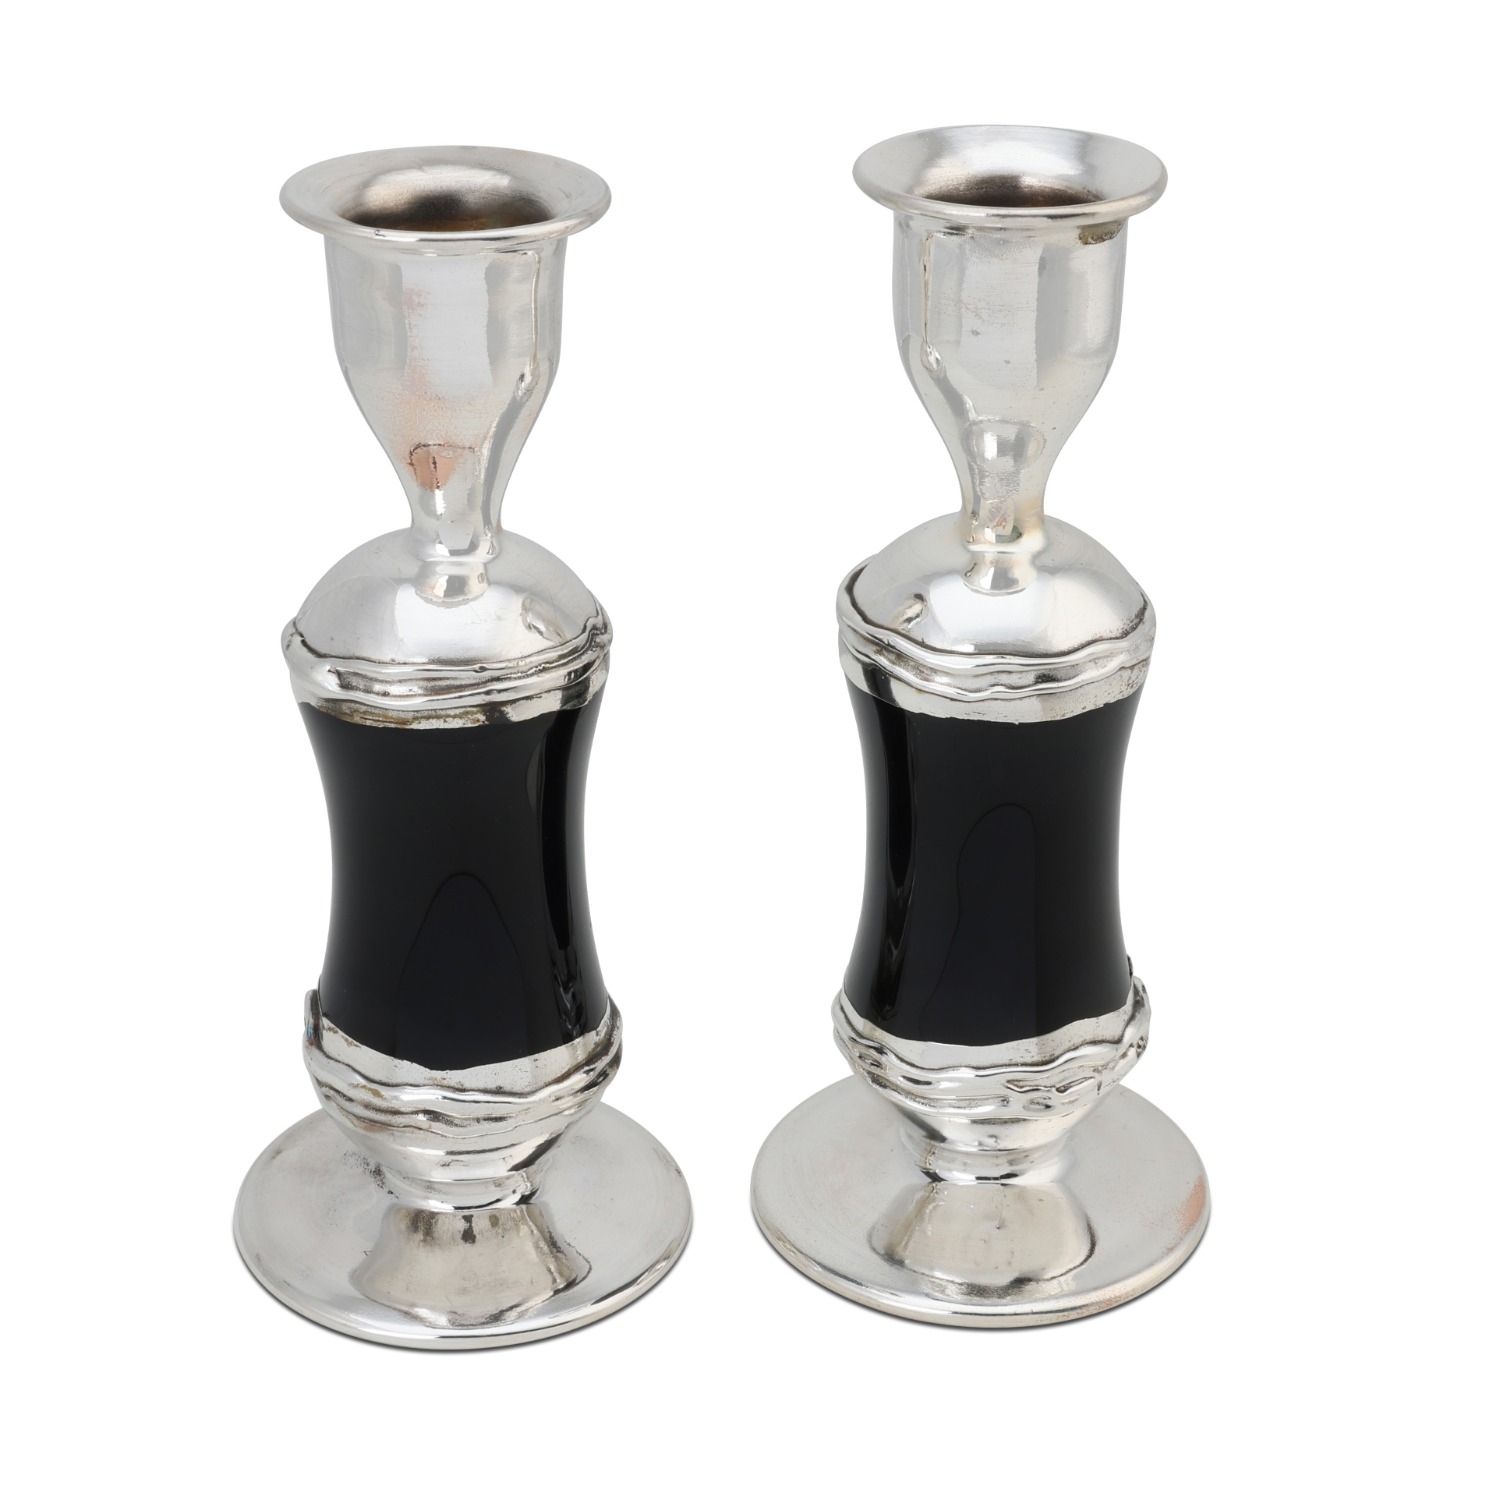 Majestic Handcrafted Sterling Silver-Plated Black Glass Sabbath Candlesticks - 1